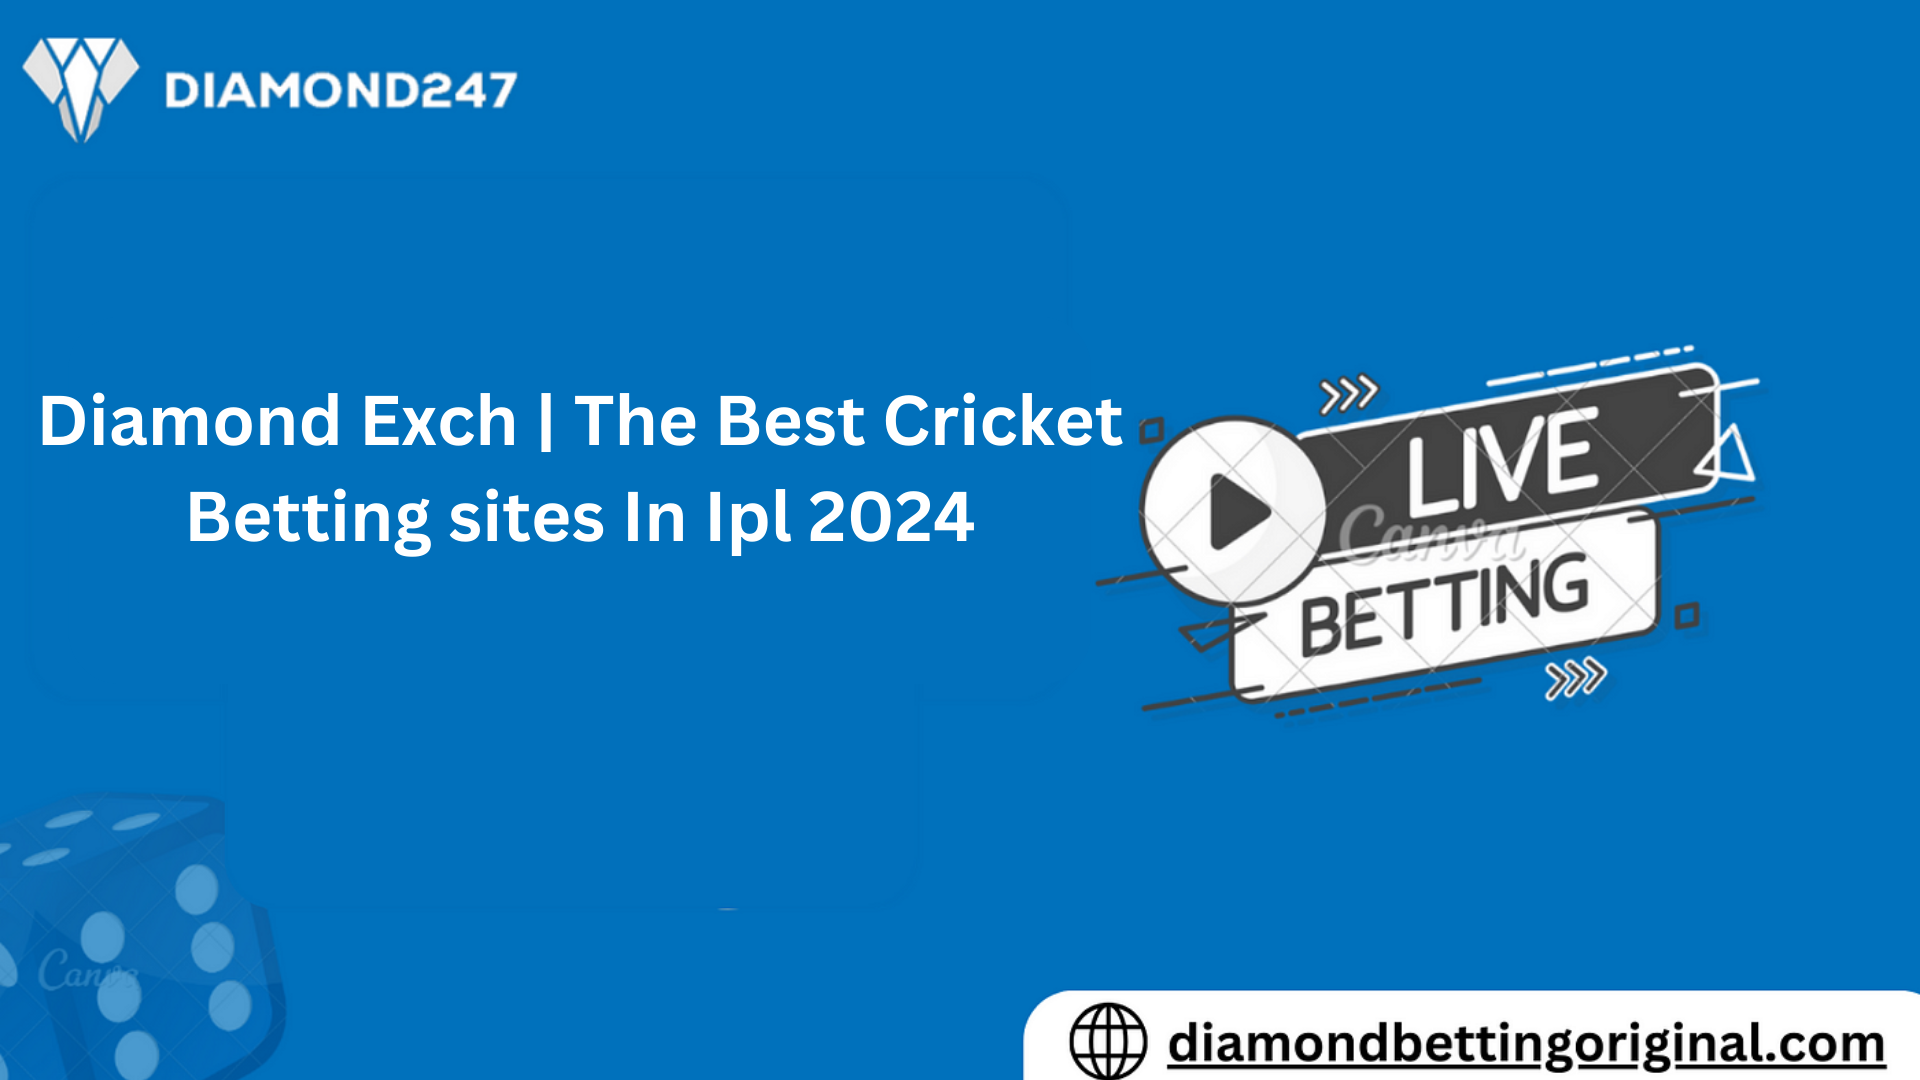 Diamond Exch | The Best Cricket Betting sites In Ipl 2024